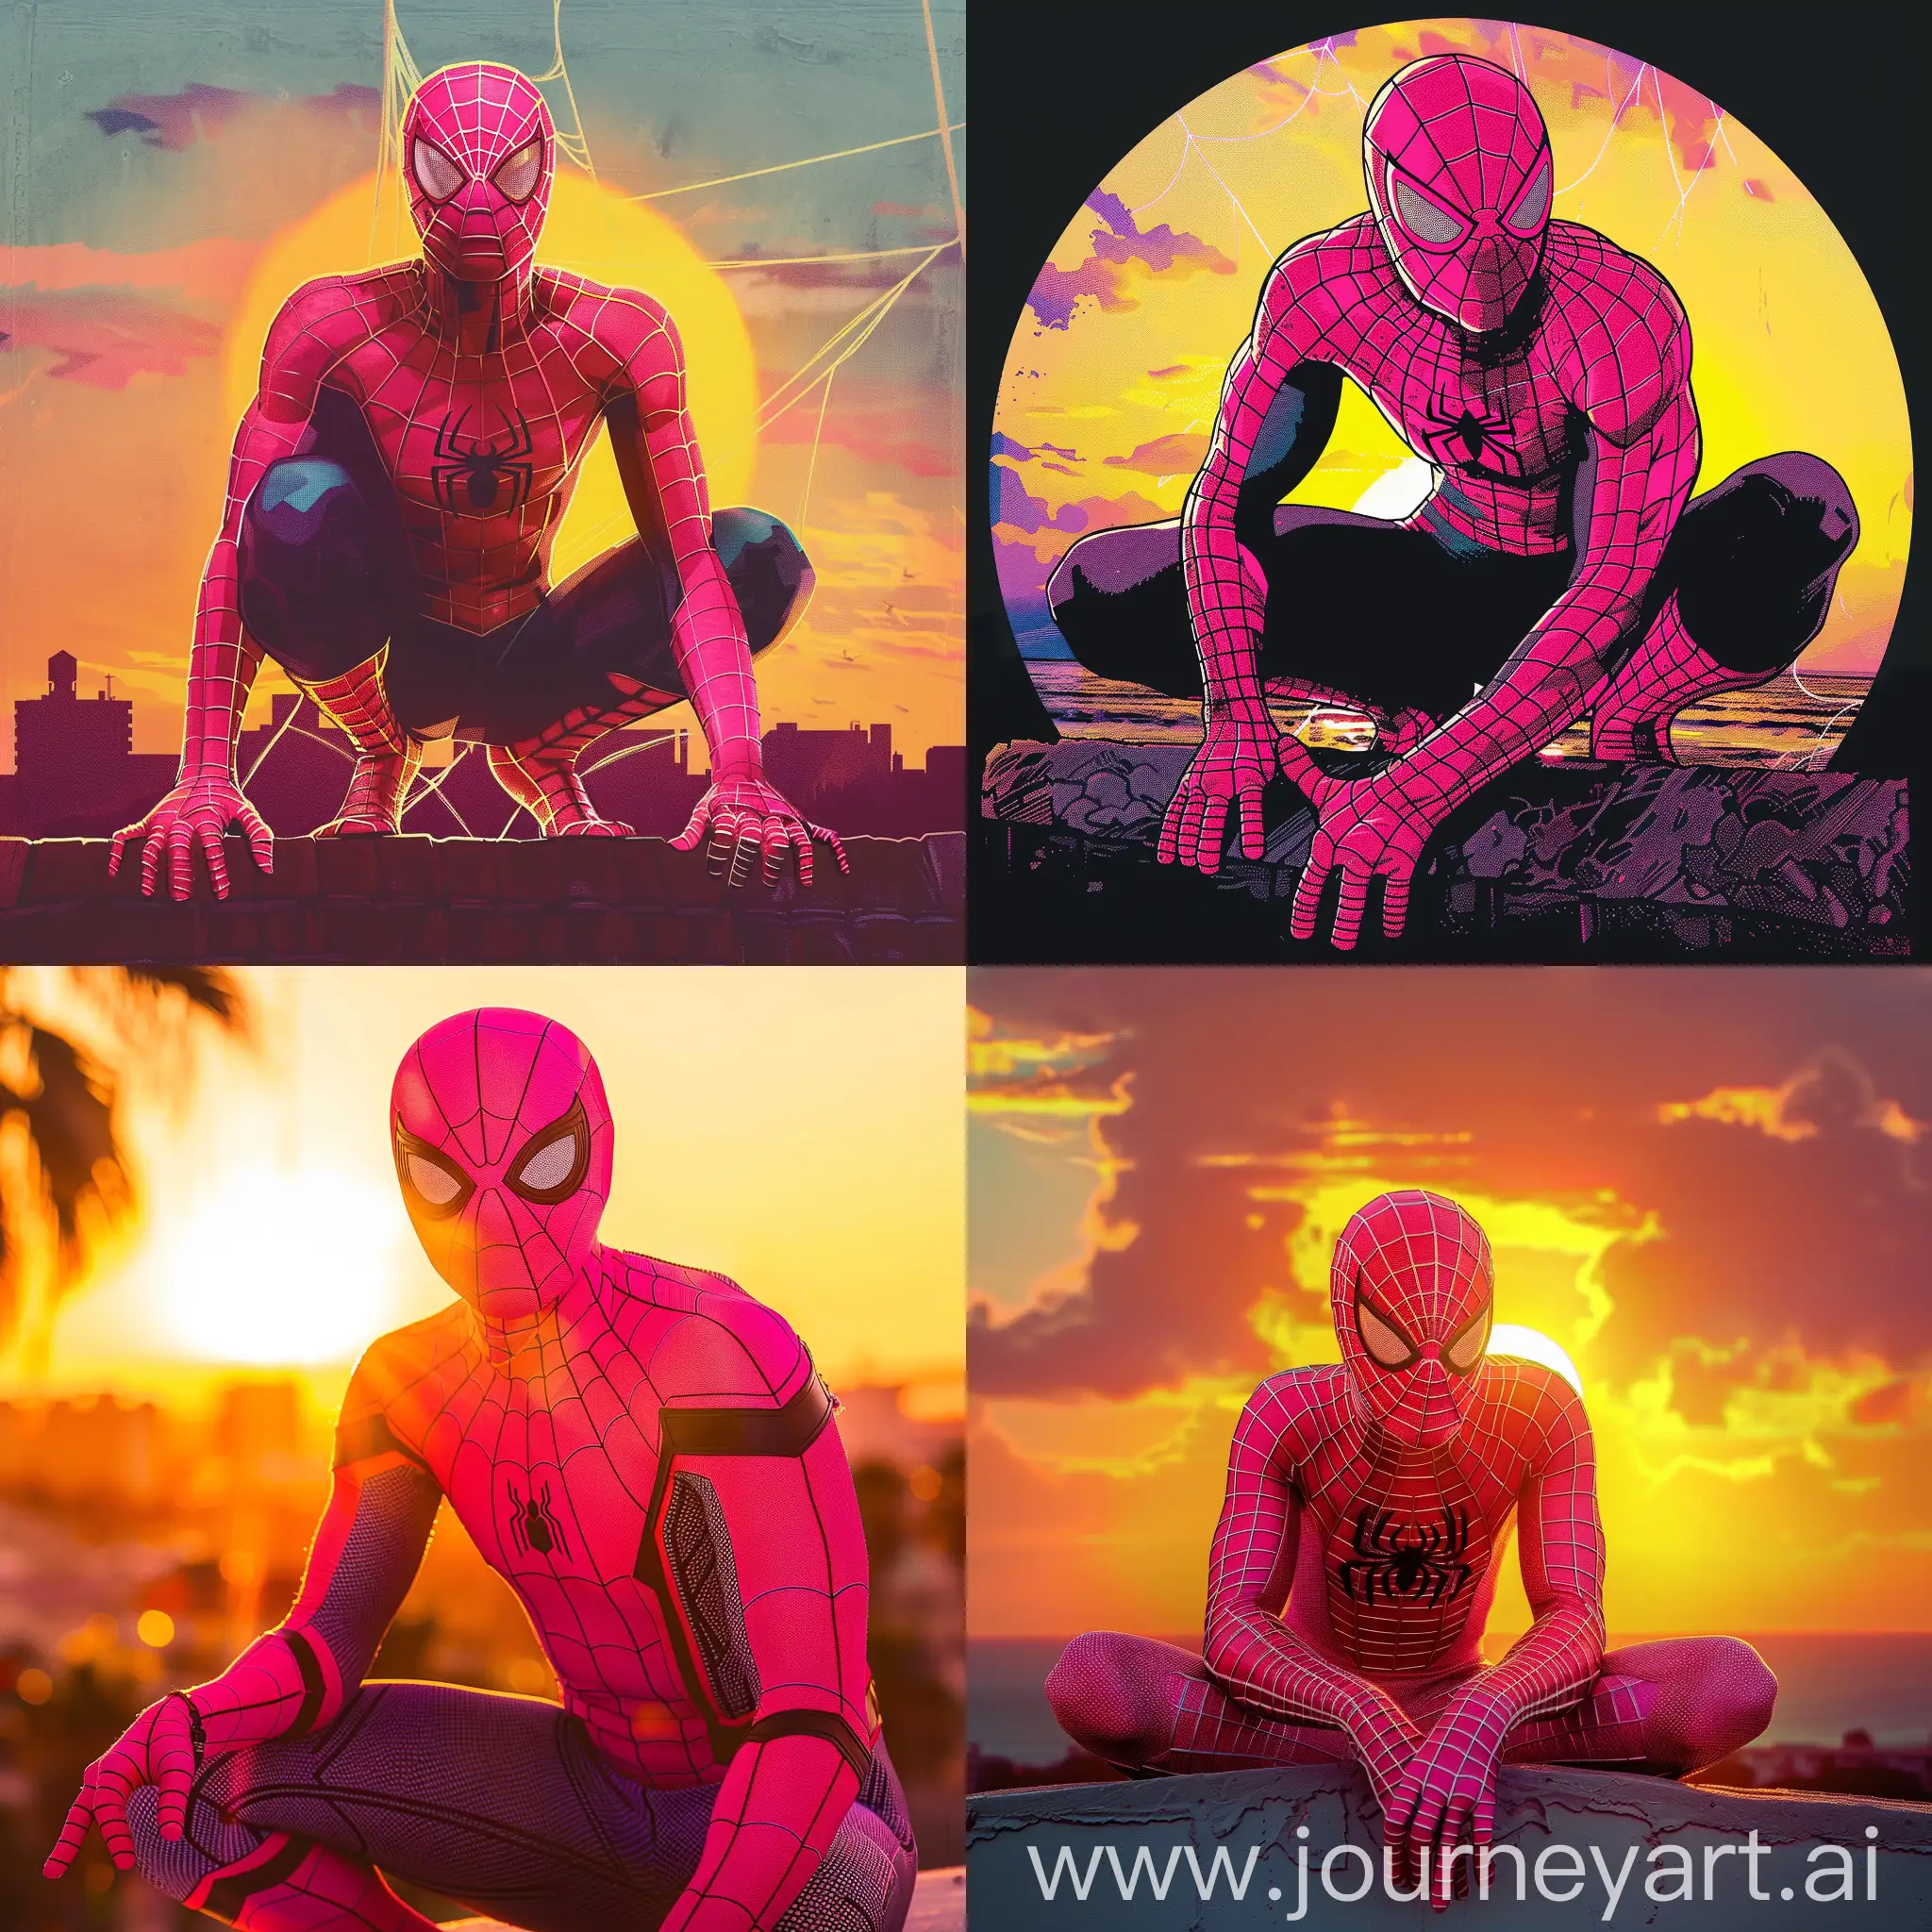 Pink-Spiderman-Silhouette-Against-Sunset-Sky